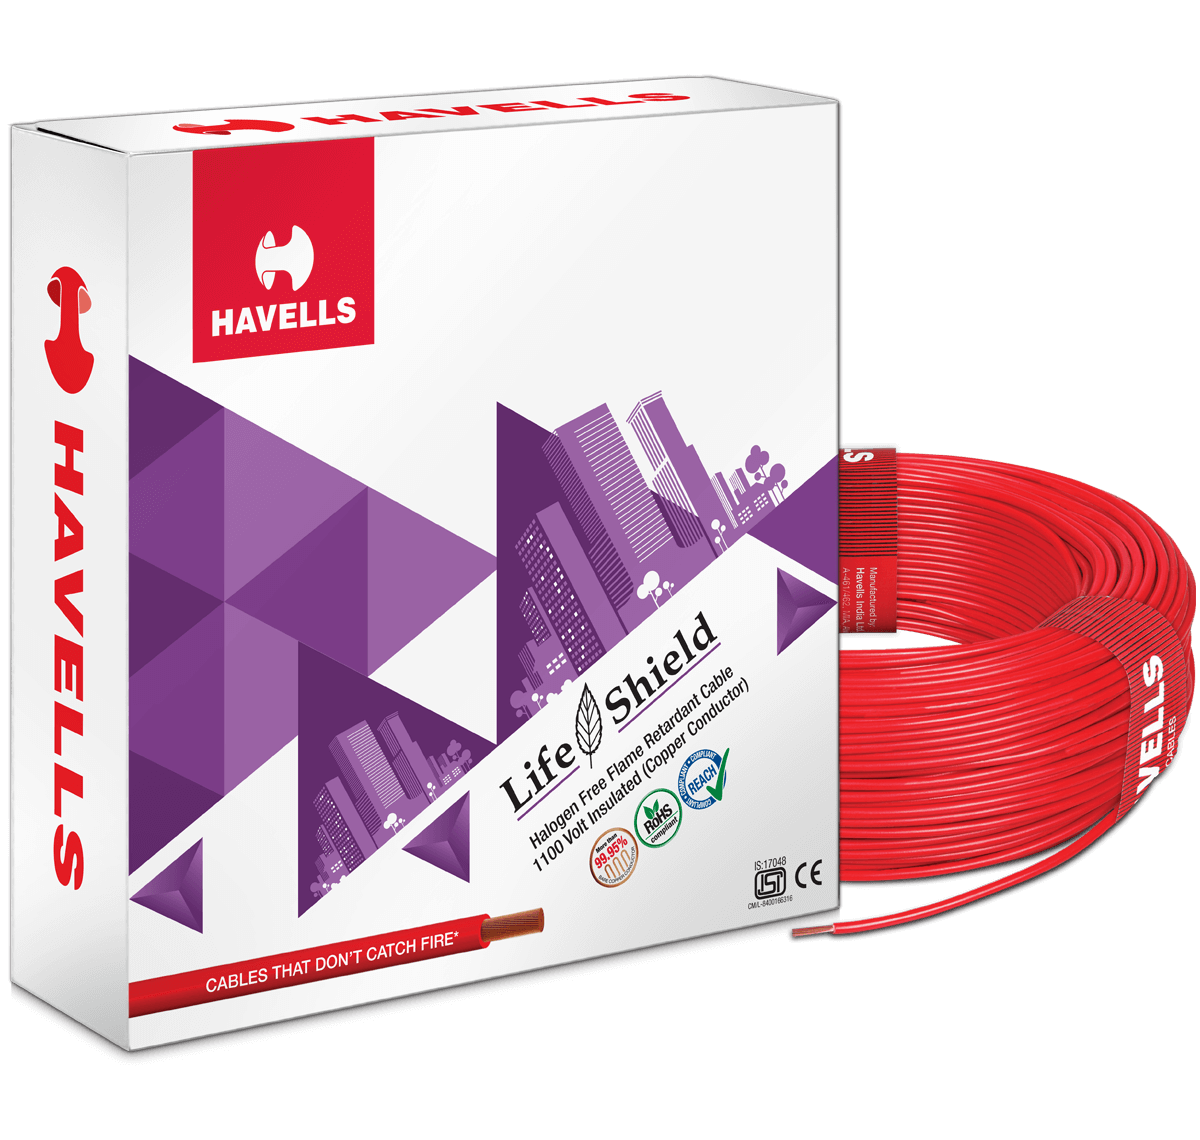 Life Shield HFFR Cables (Red)